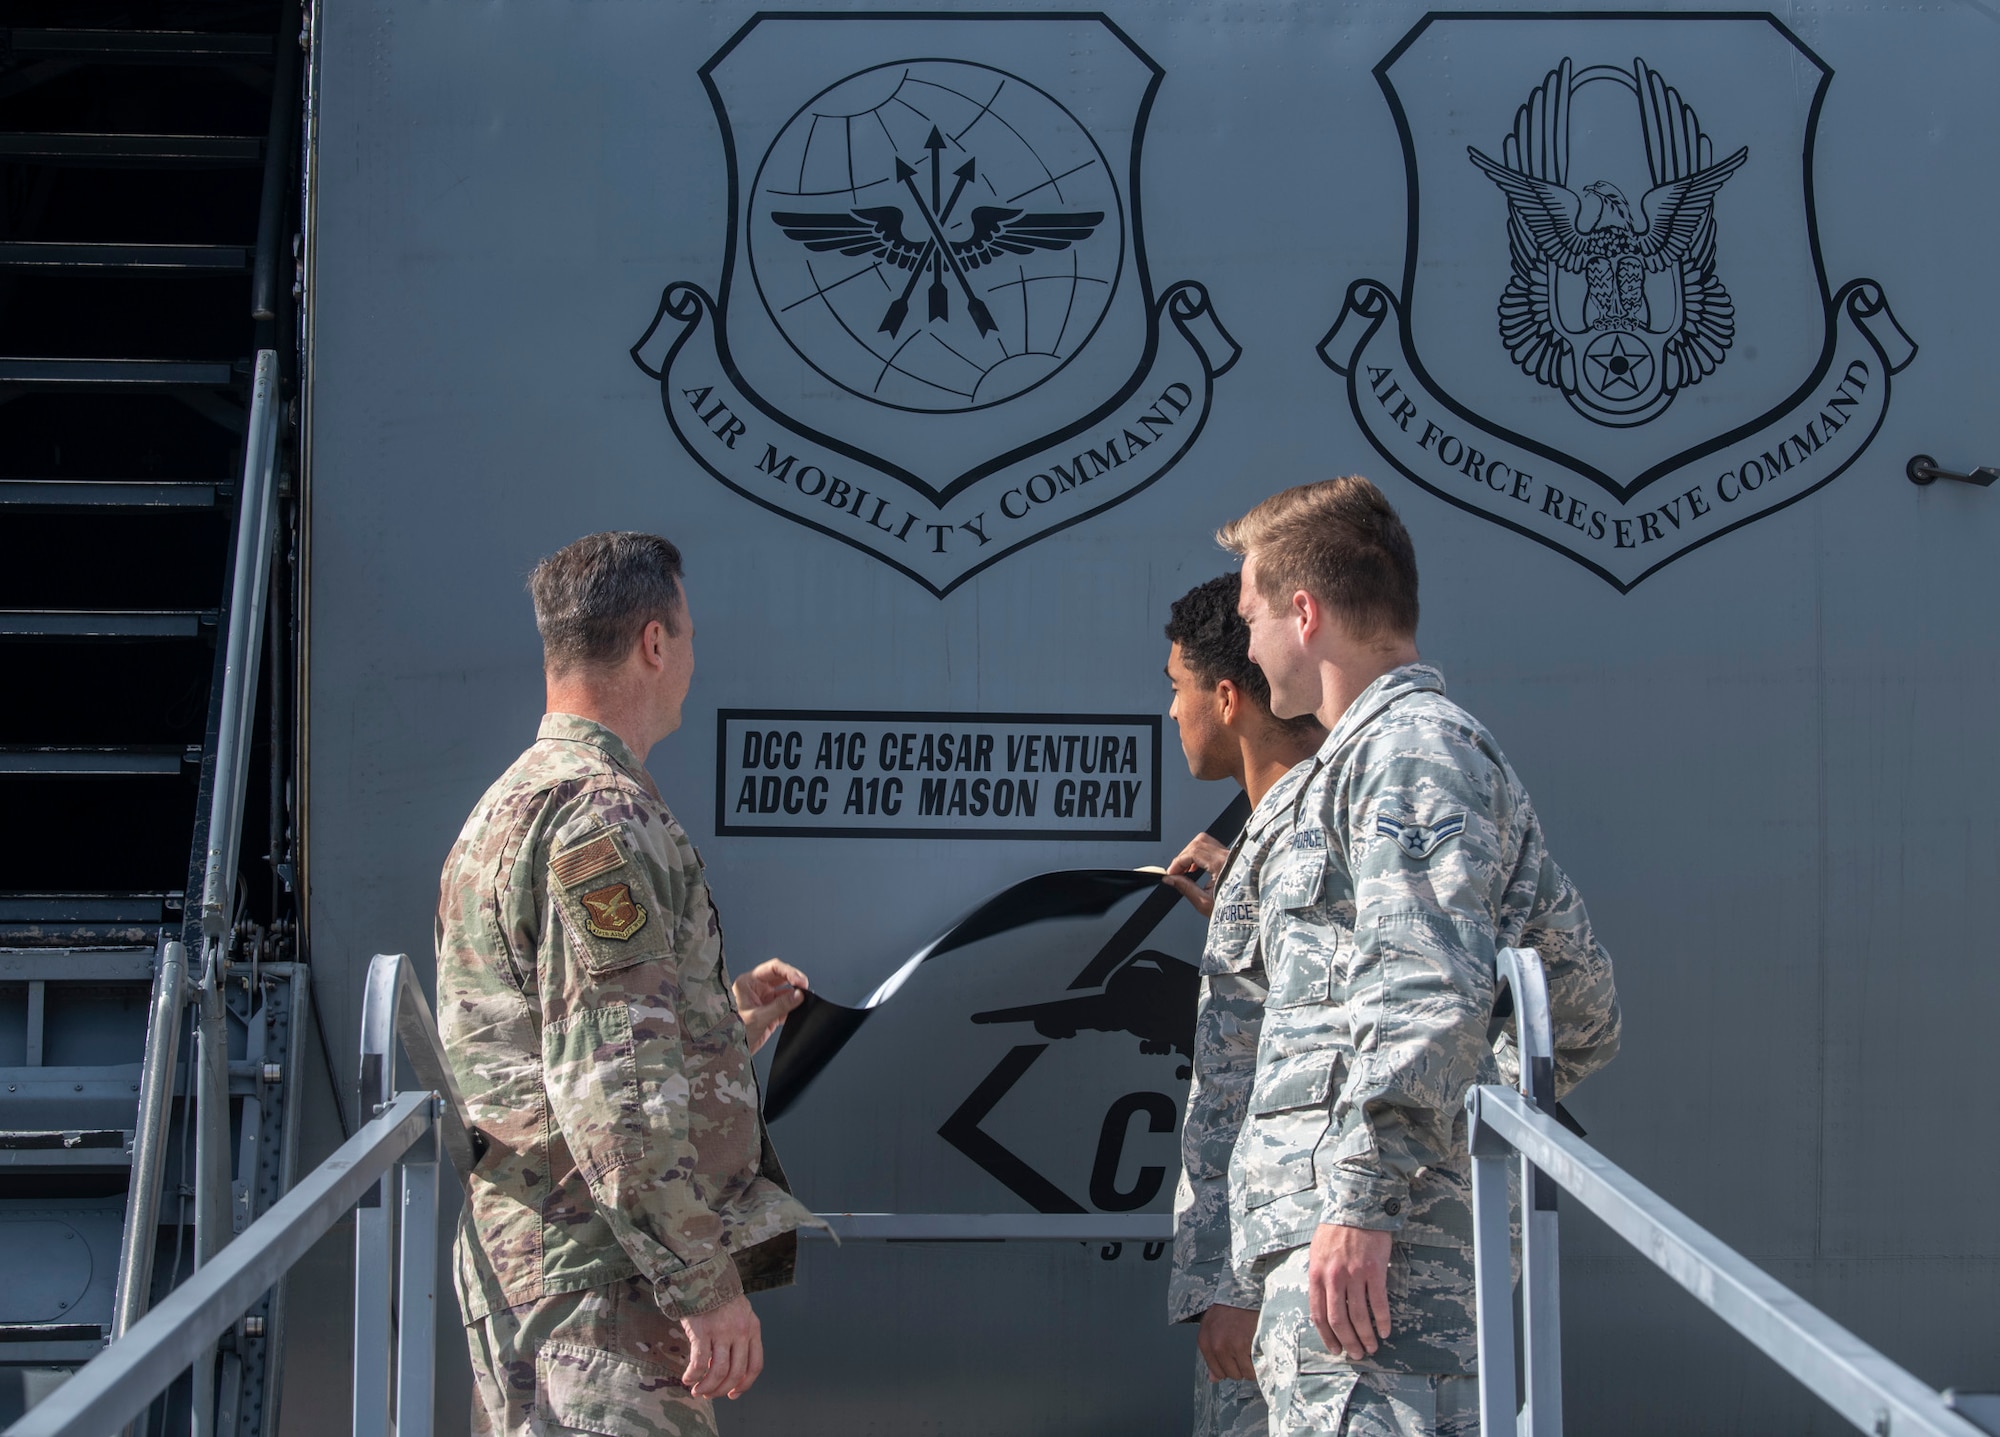 Col. Joel Safranek, 436th Airlift Wing commander, Airman 1st Class Ceasar Ventura, 436th Aircraft Maintenance Squadron dedicated crew chief, and Airman 1st Class Mason Gray, 436th AMXS assistant dedicated crew chief, pull off tape during a DCC unveiling ceremony Oct. 4, 2019, at Dover Air Force Base, Del. A change in policy marked the first time in approximately 20 years that the names of dedicated crew chiefs were unveiled on an Air Mobility Command C-5M Super Galaxy and C-17 Globemaster III.  (U.S. Air Force photo by Senior Airman Christopher Quail)